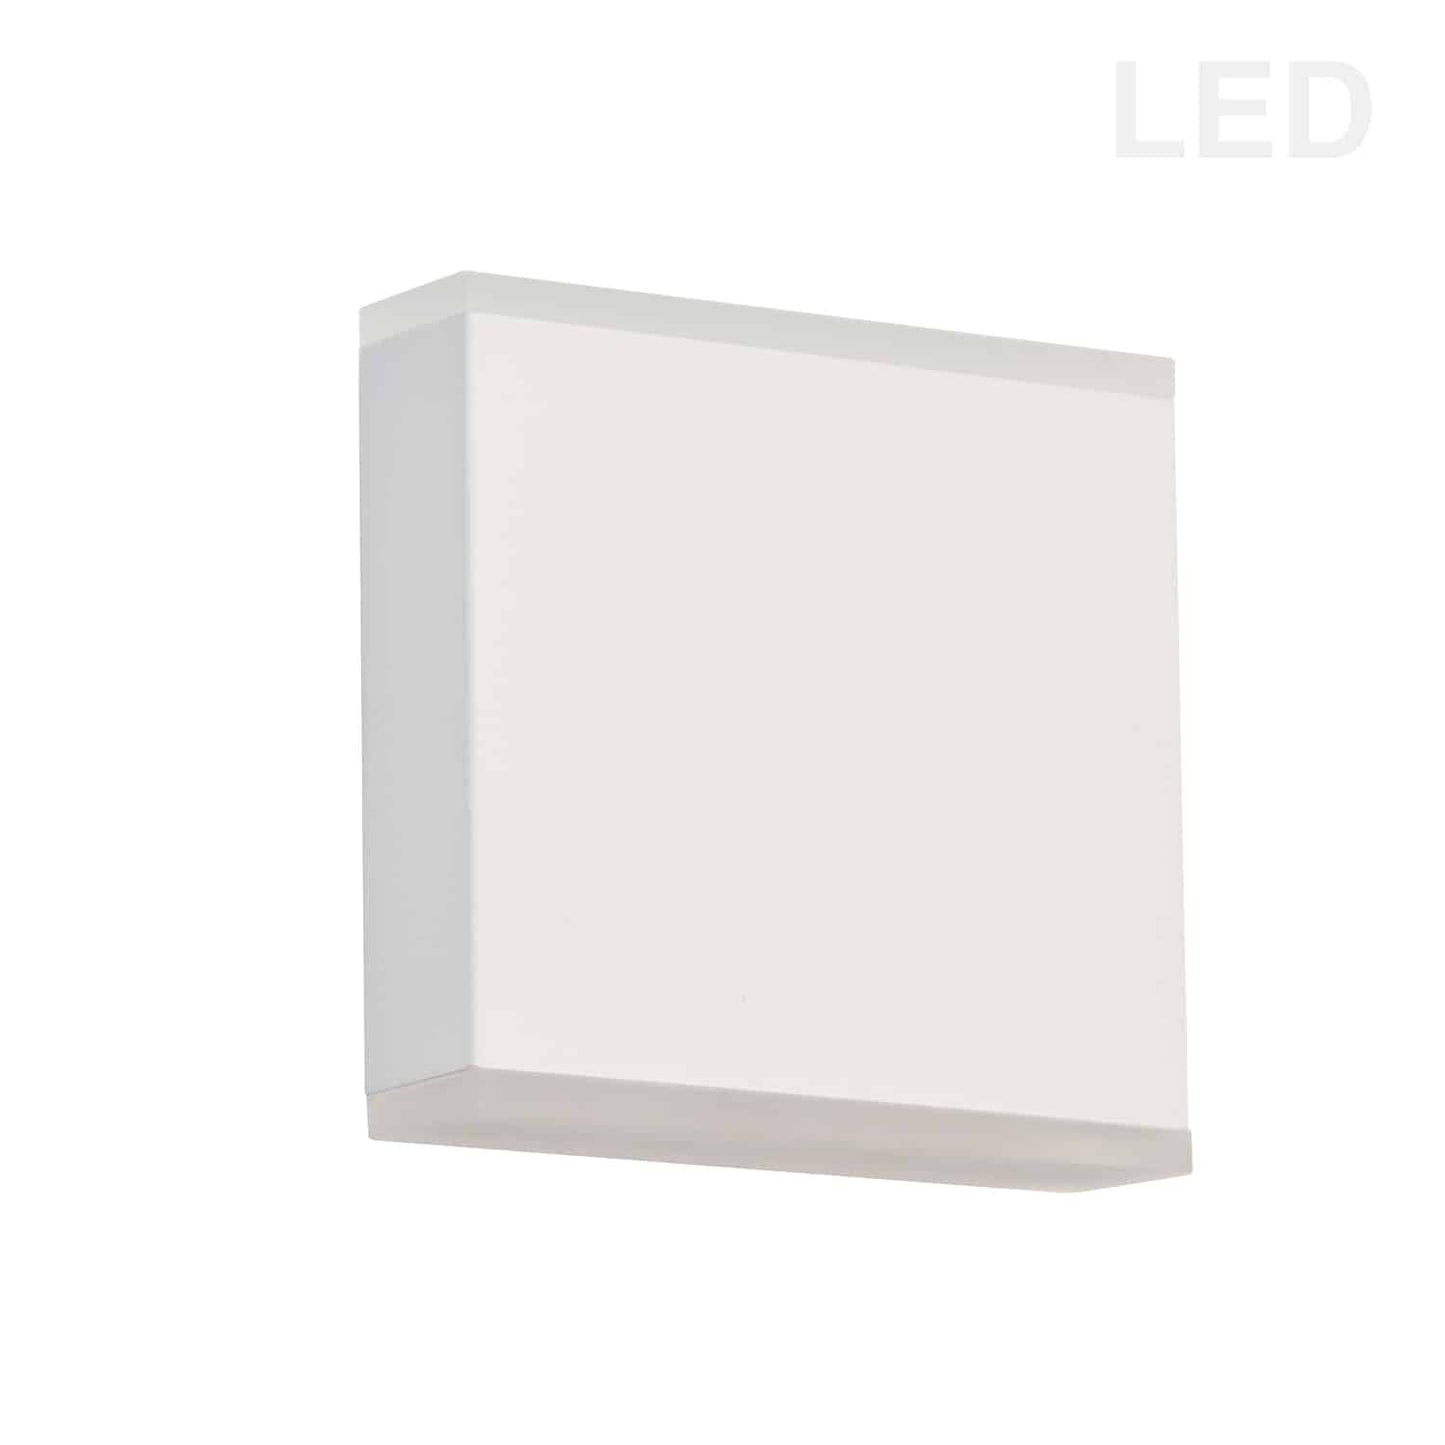 Dainolite EMY-550-5W-MW 15W LED Wall Sconce, Matte White with Frosted Acrylic Diffuser